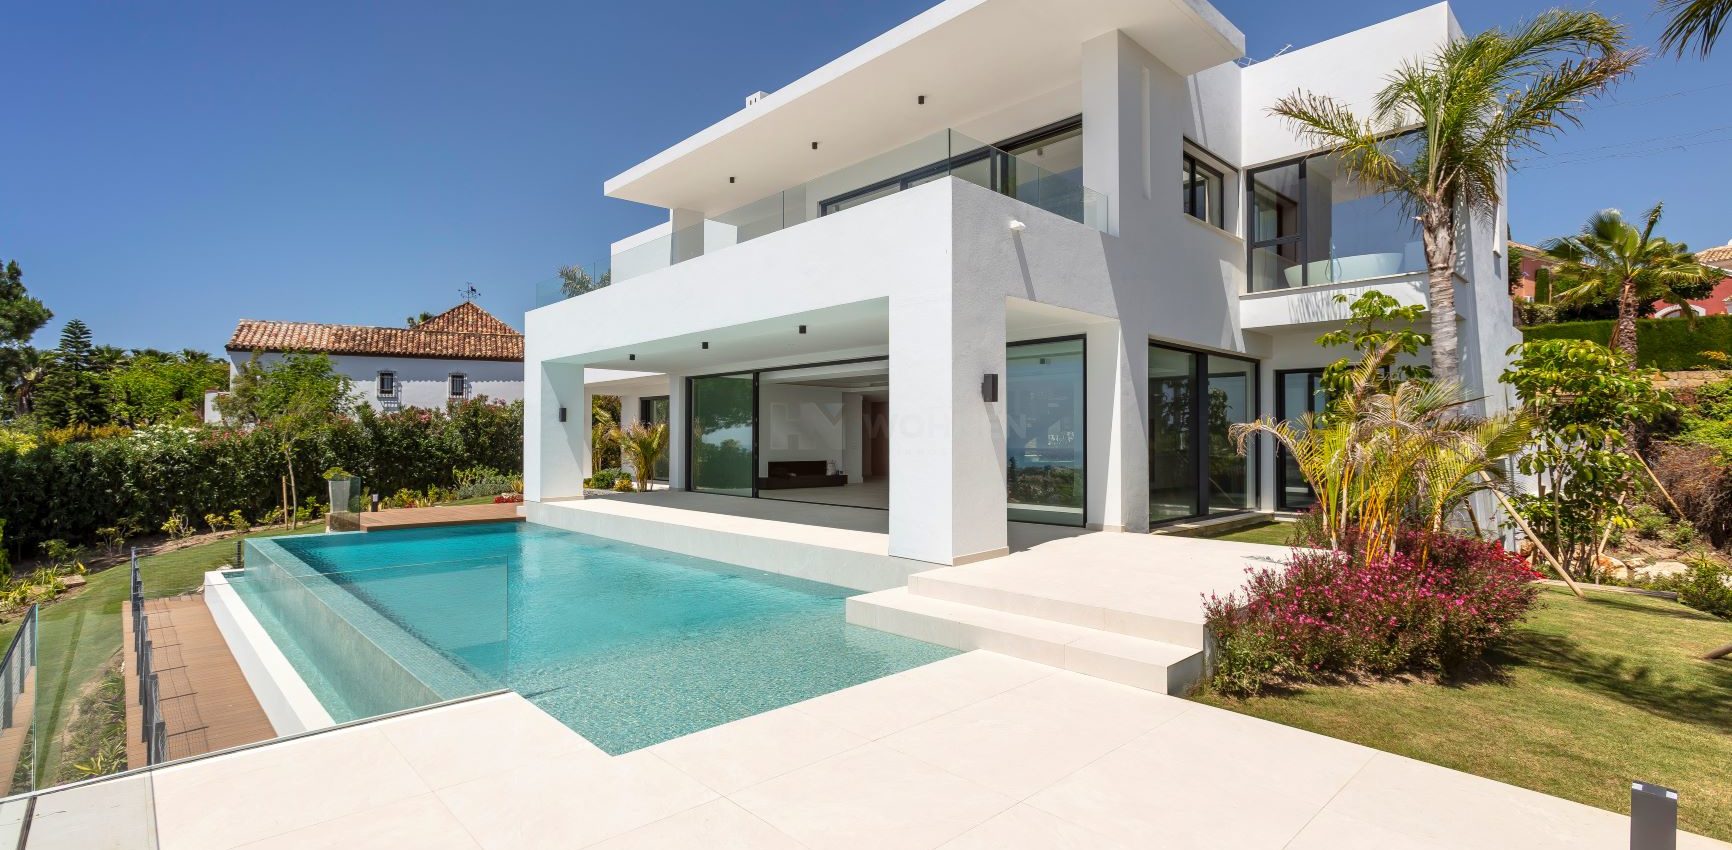 Spectacular new built modern villa with breathtaking panoramic sea views